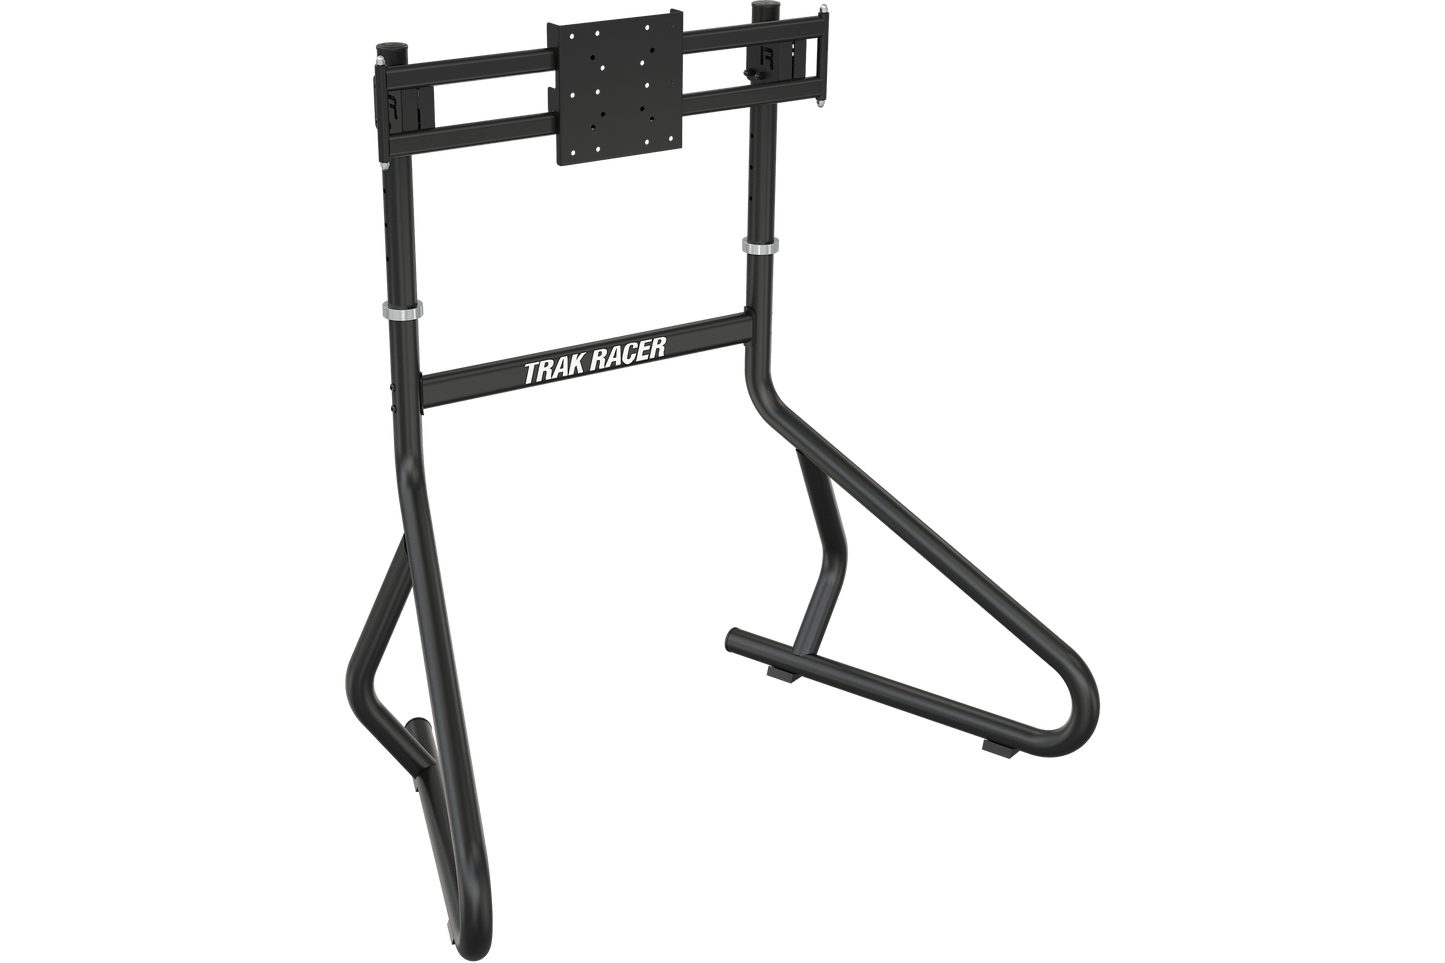 Trak Racer Freestanding Single Monitor Stand -  up to 80" Display